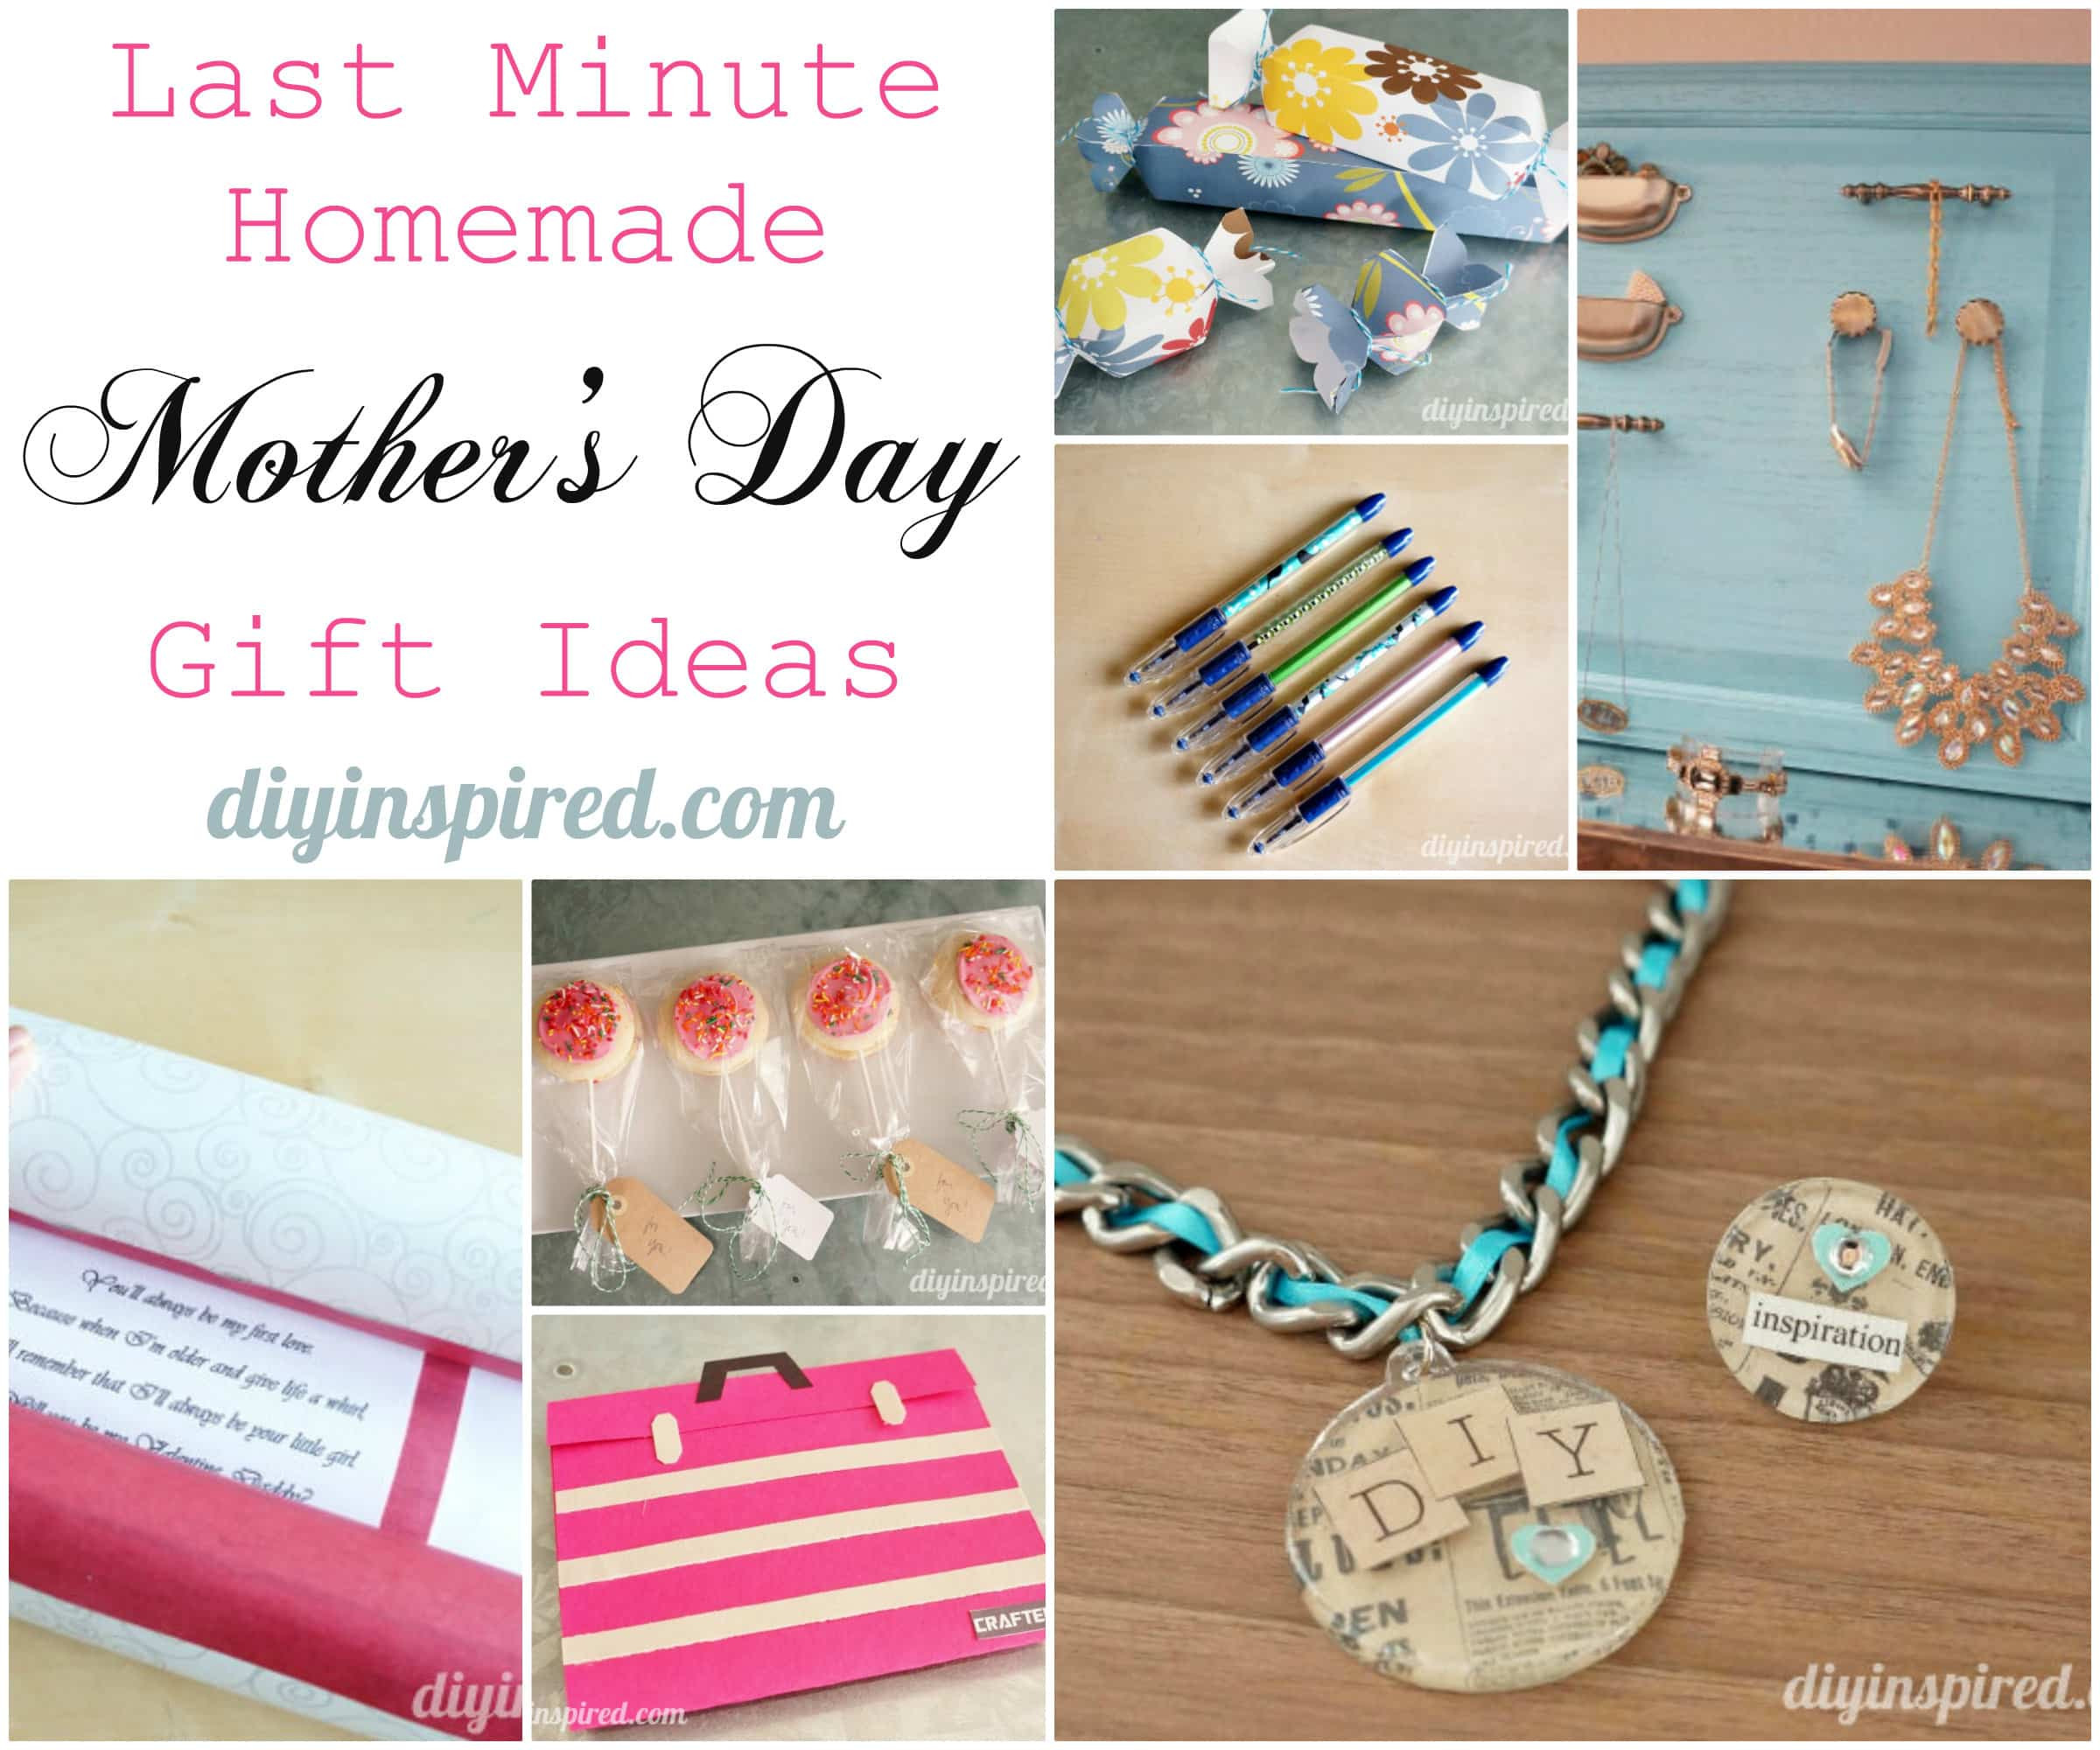 Last Minute DIY Gifts For Mom
 Last Minute Homemade Mother’s Day Gift Ideas DIY Inspired